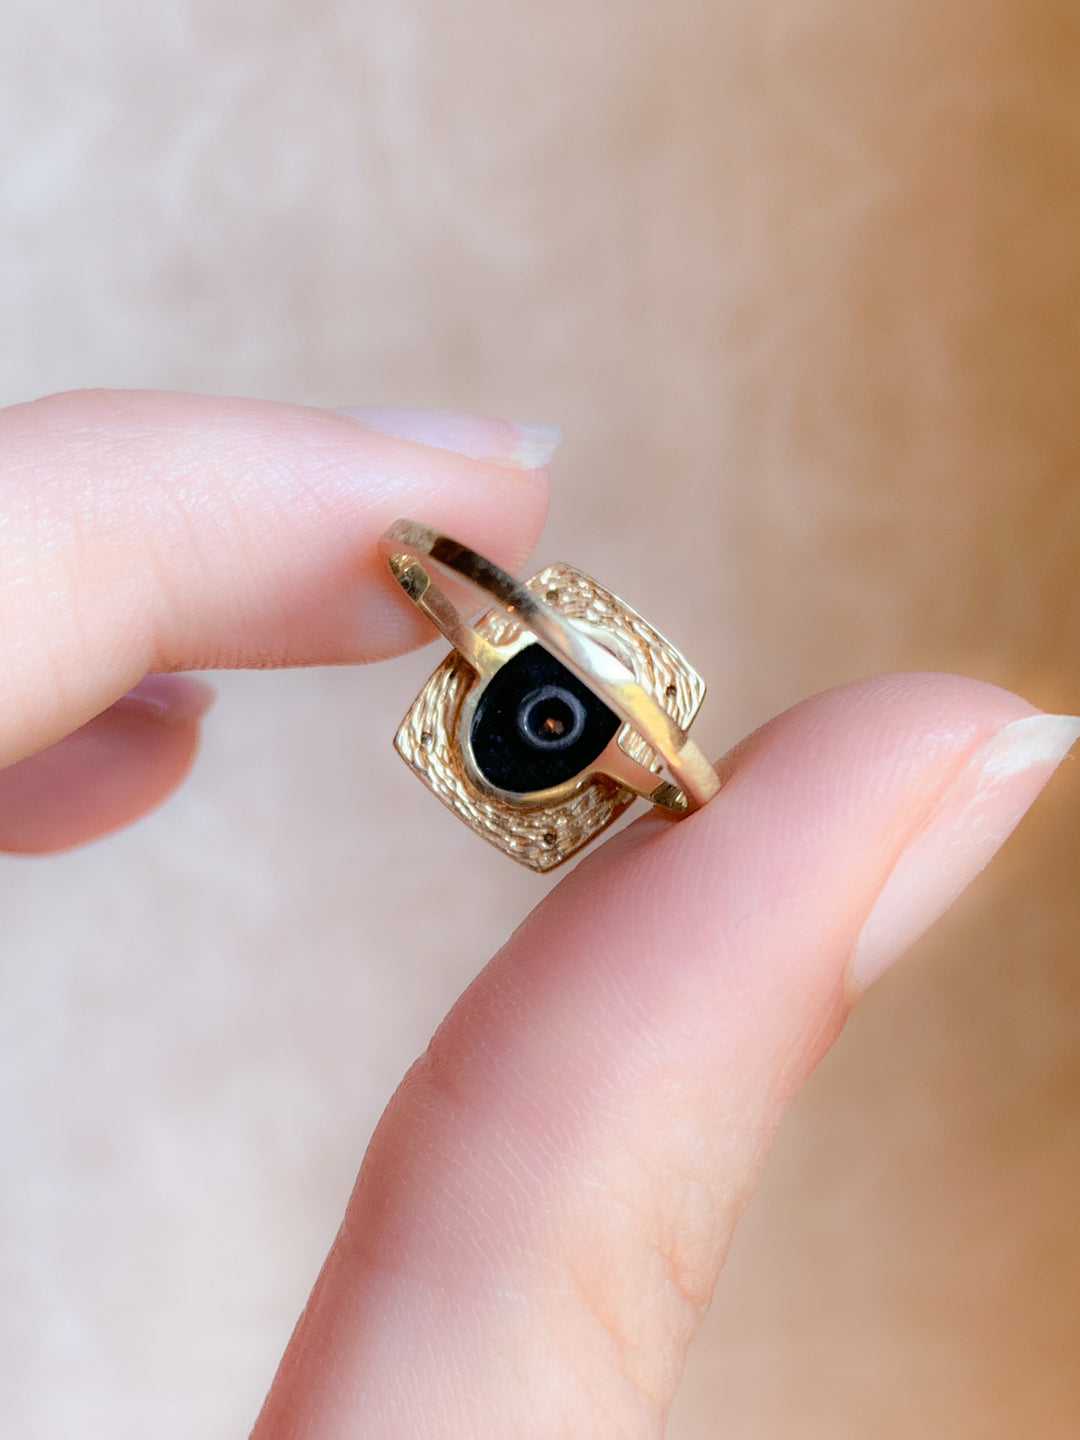 14ct Superb 1940’s Onyx and Diamond Ring & Gold Filled Split Ring